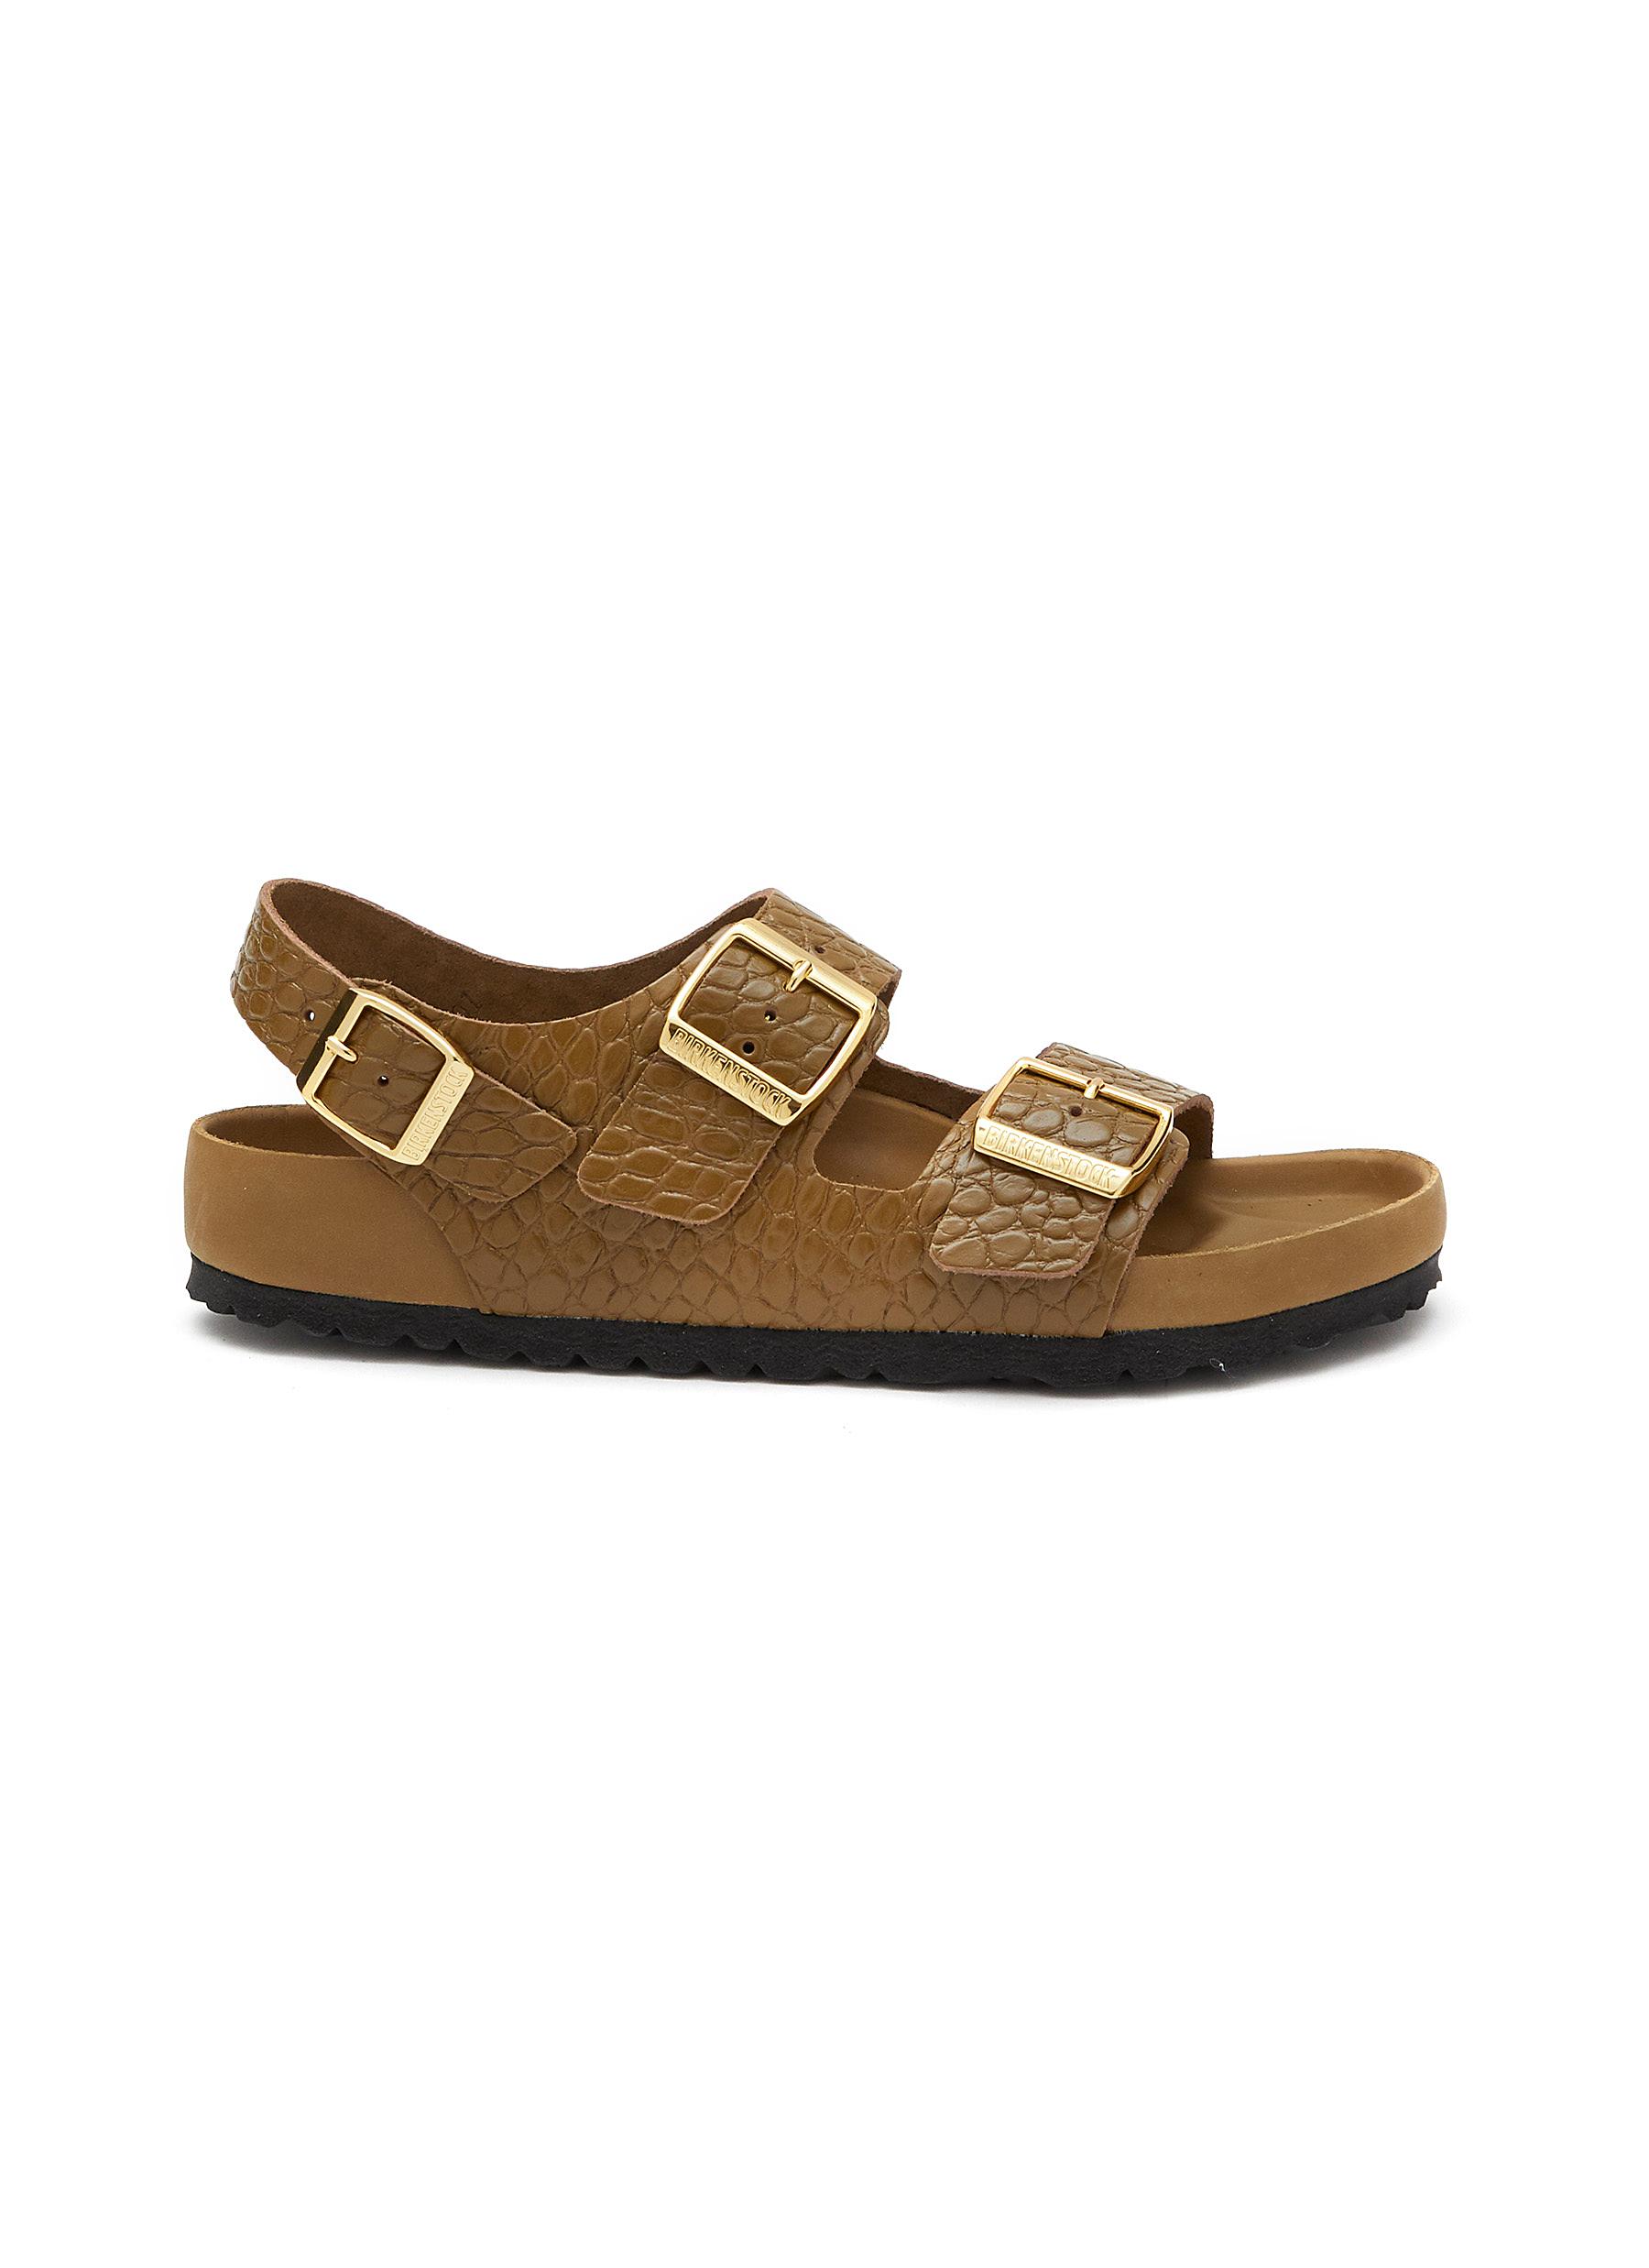 ‘Milano' Reptile Embossed Leather Sandals